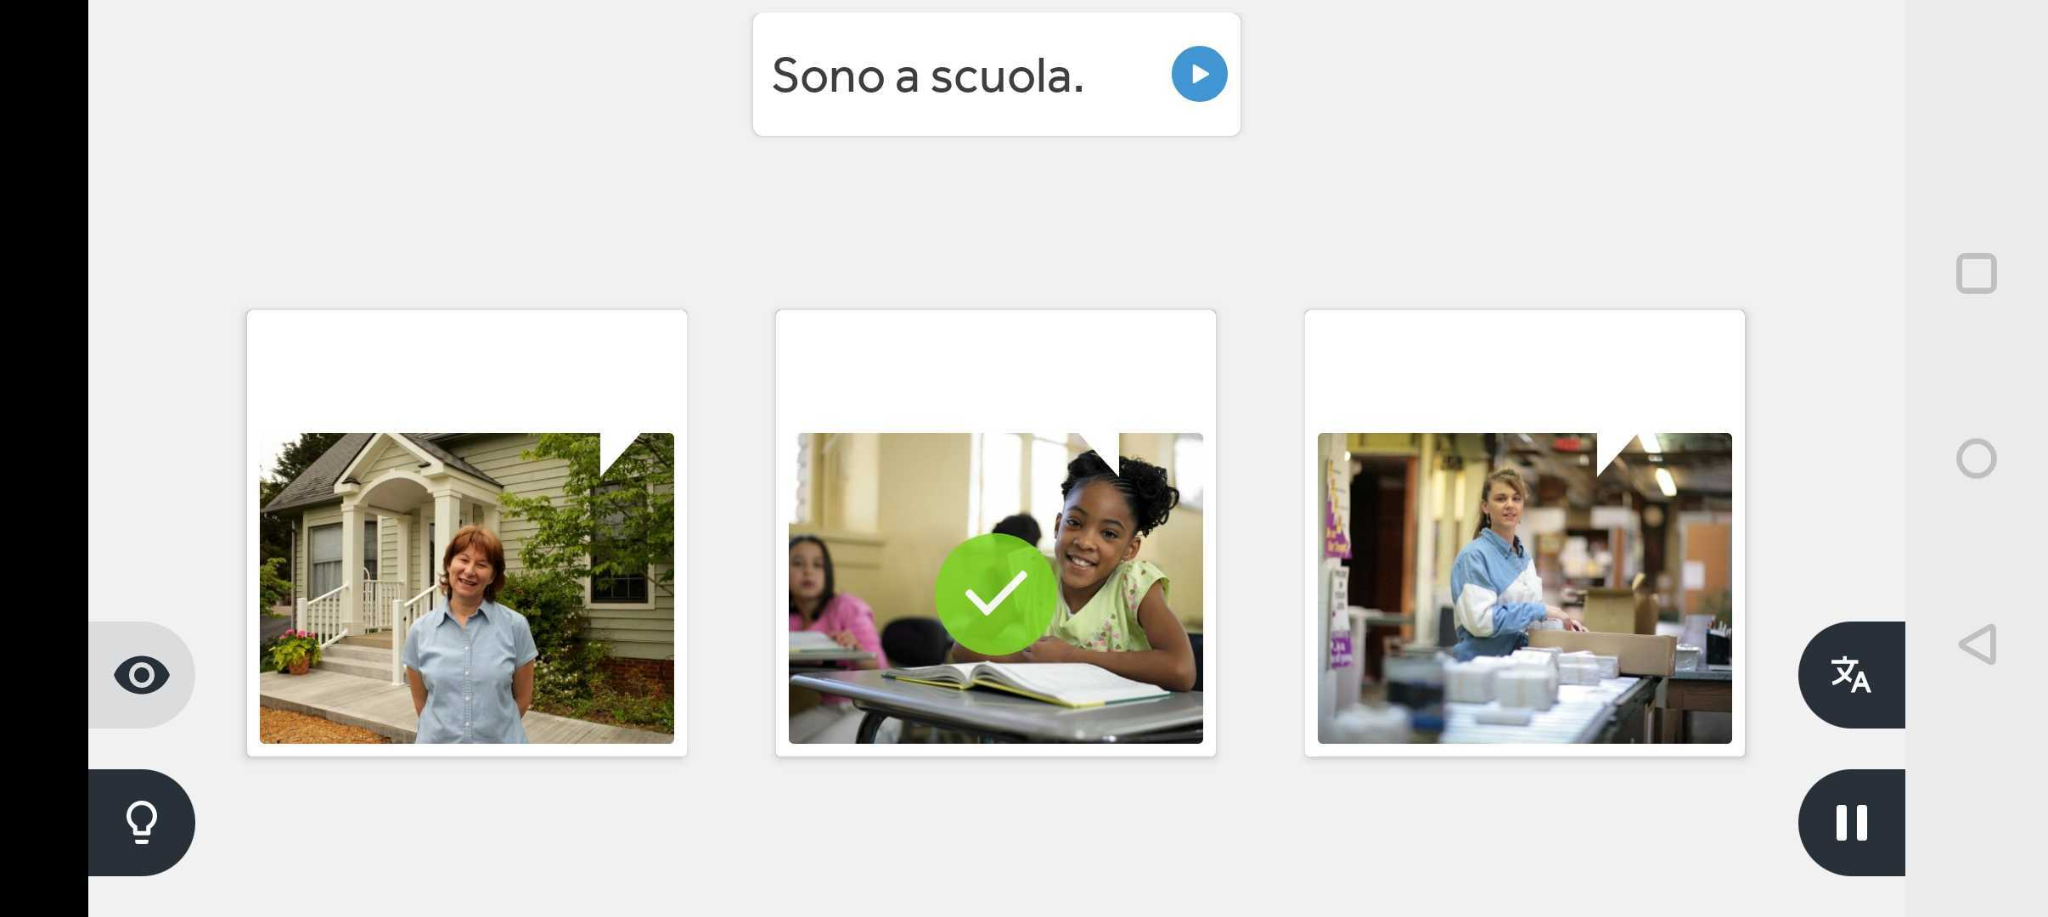 On Rosetta Stone you'll pronounce a phrase in your target language, then choose the image that corresponds